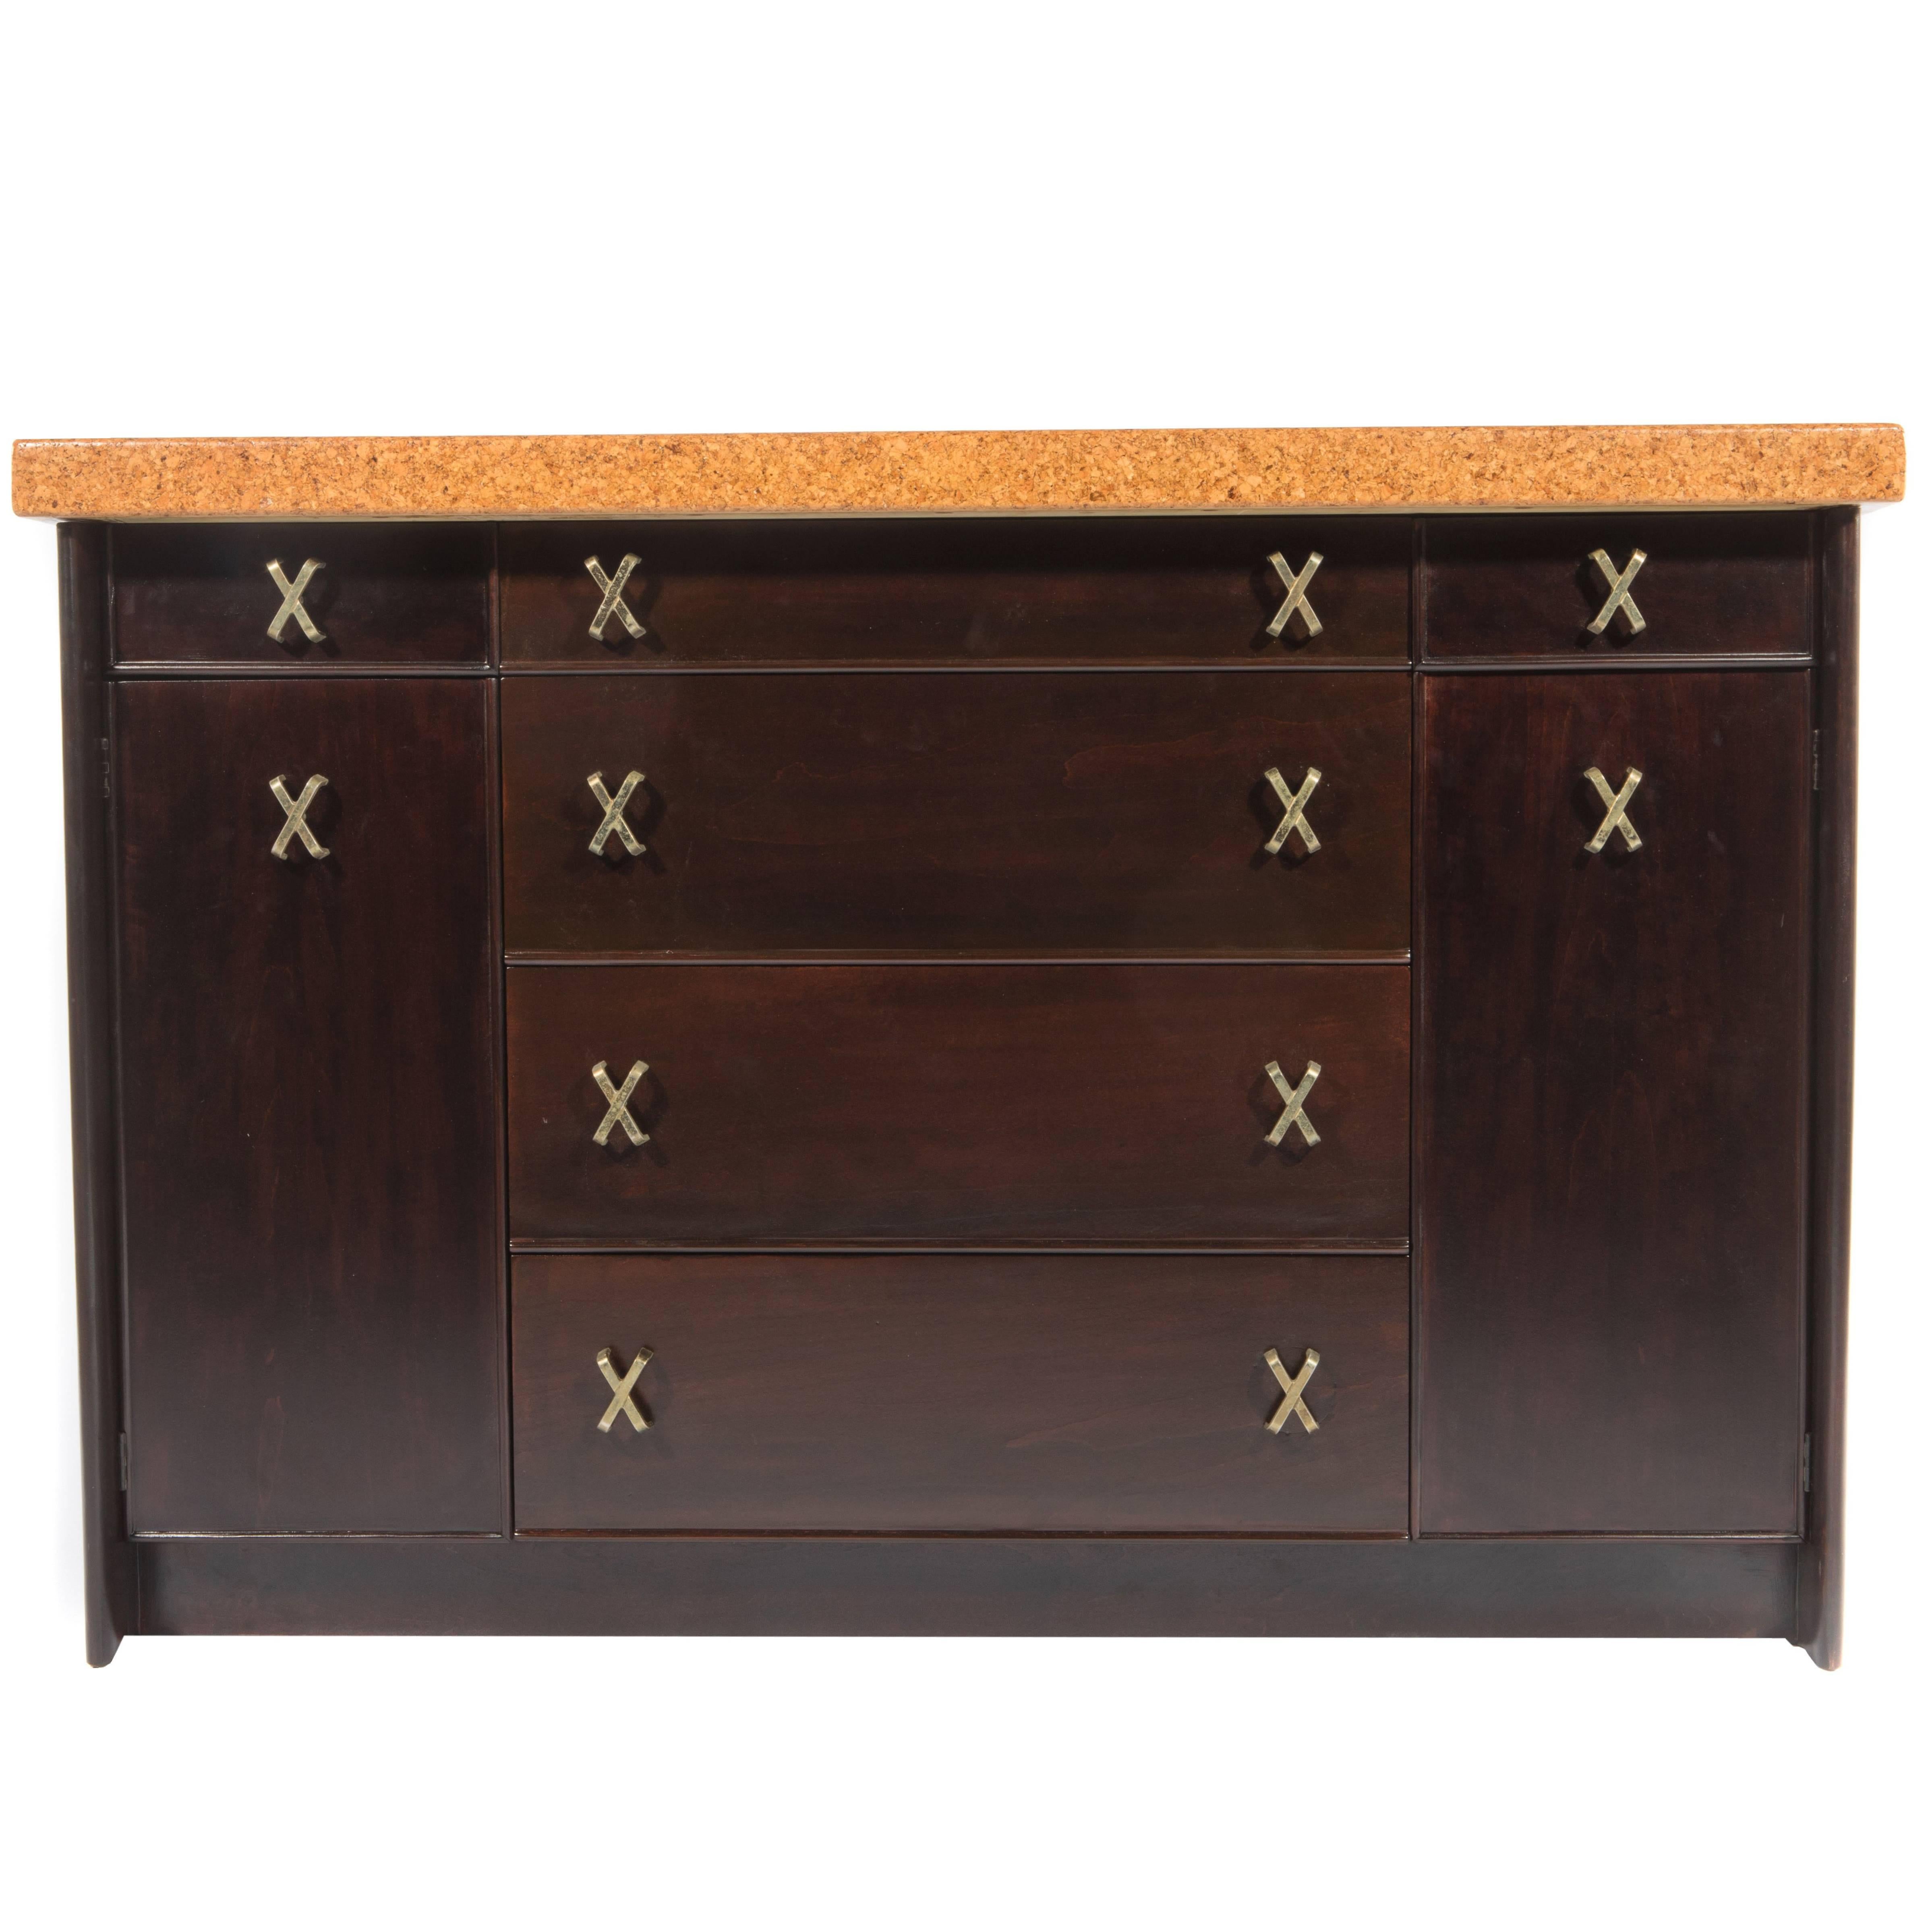 Cork-Top Sideboard by Paul Frankl for Johnson Furniture, circa 1950s